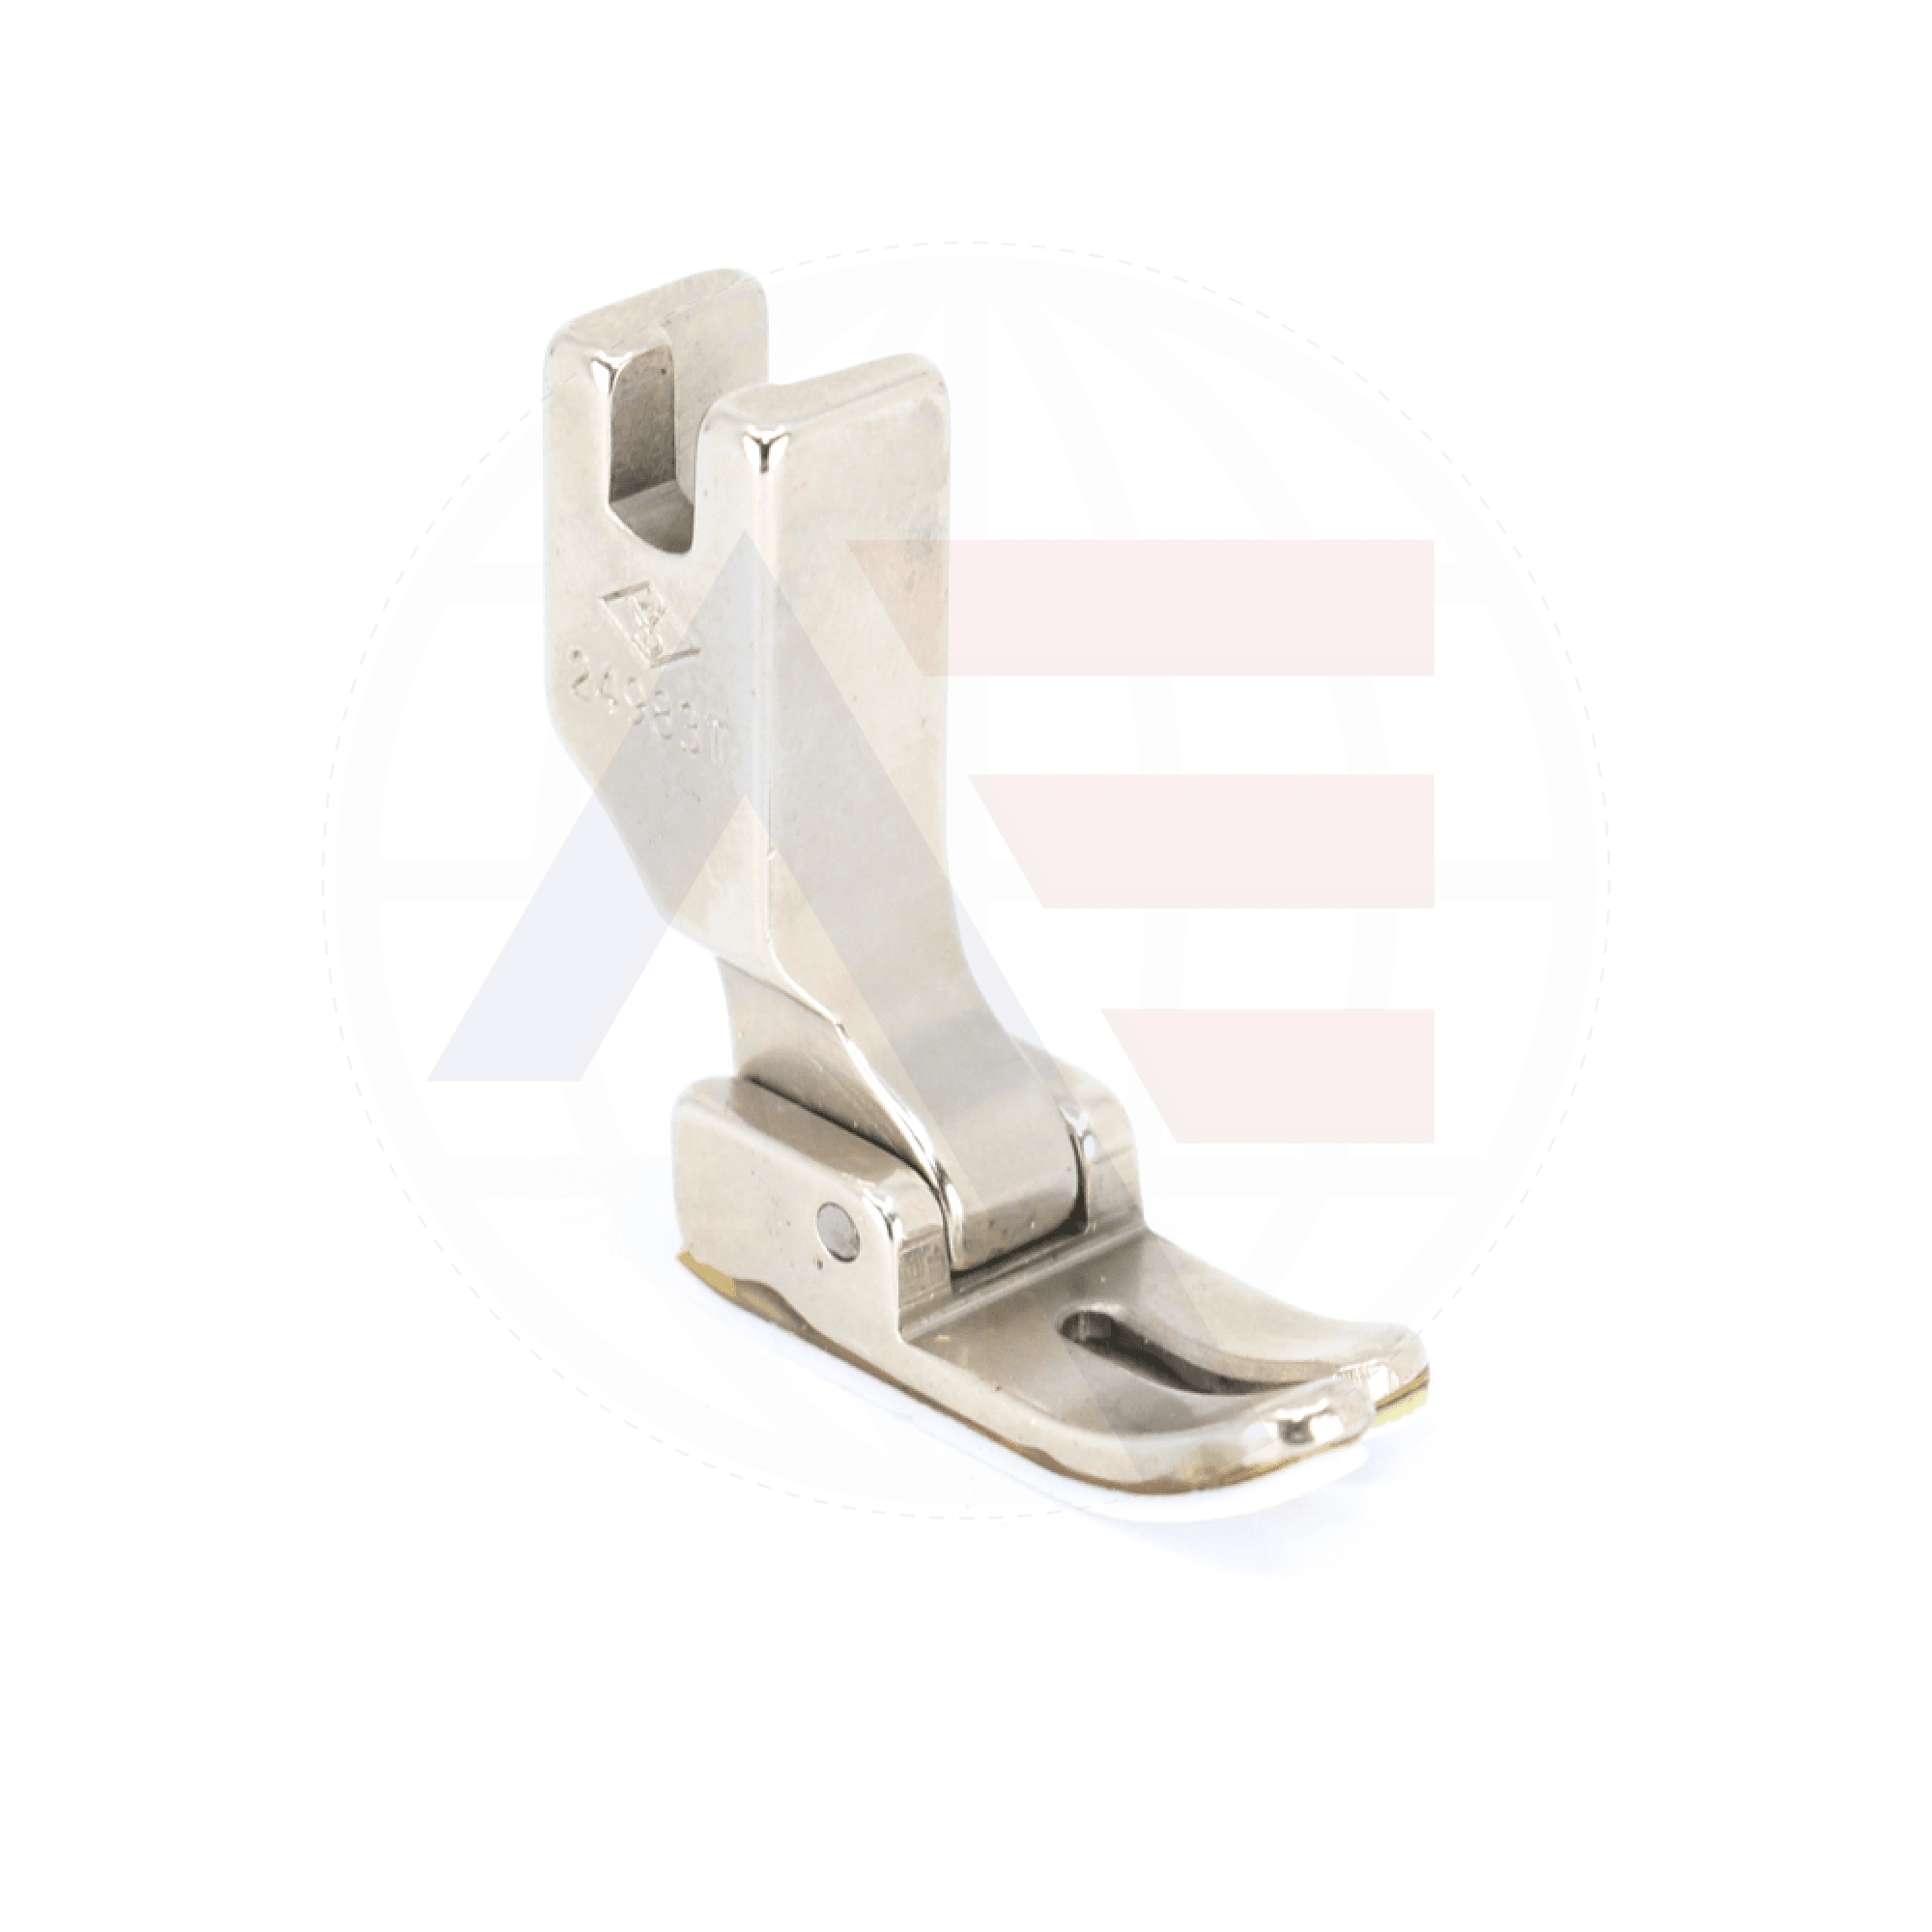 24983T Teflon Foot Sewing Machine Spare Parts